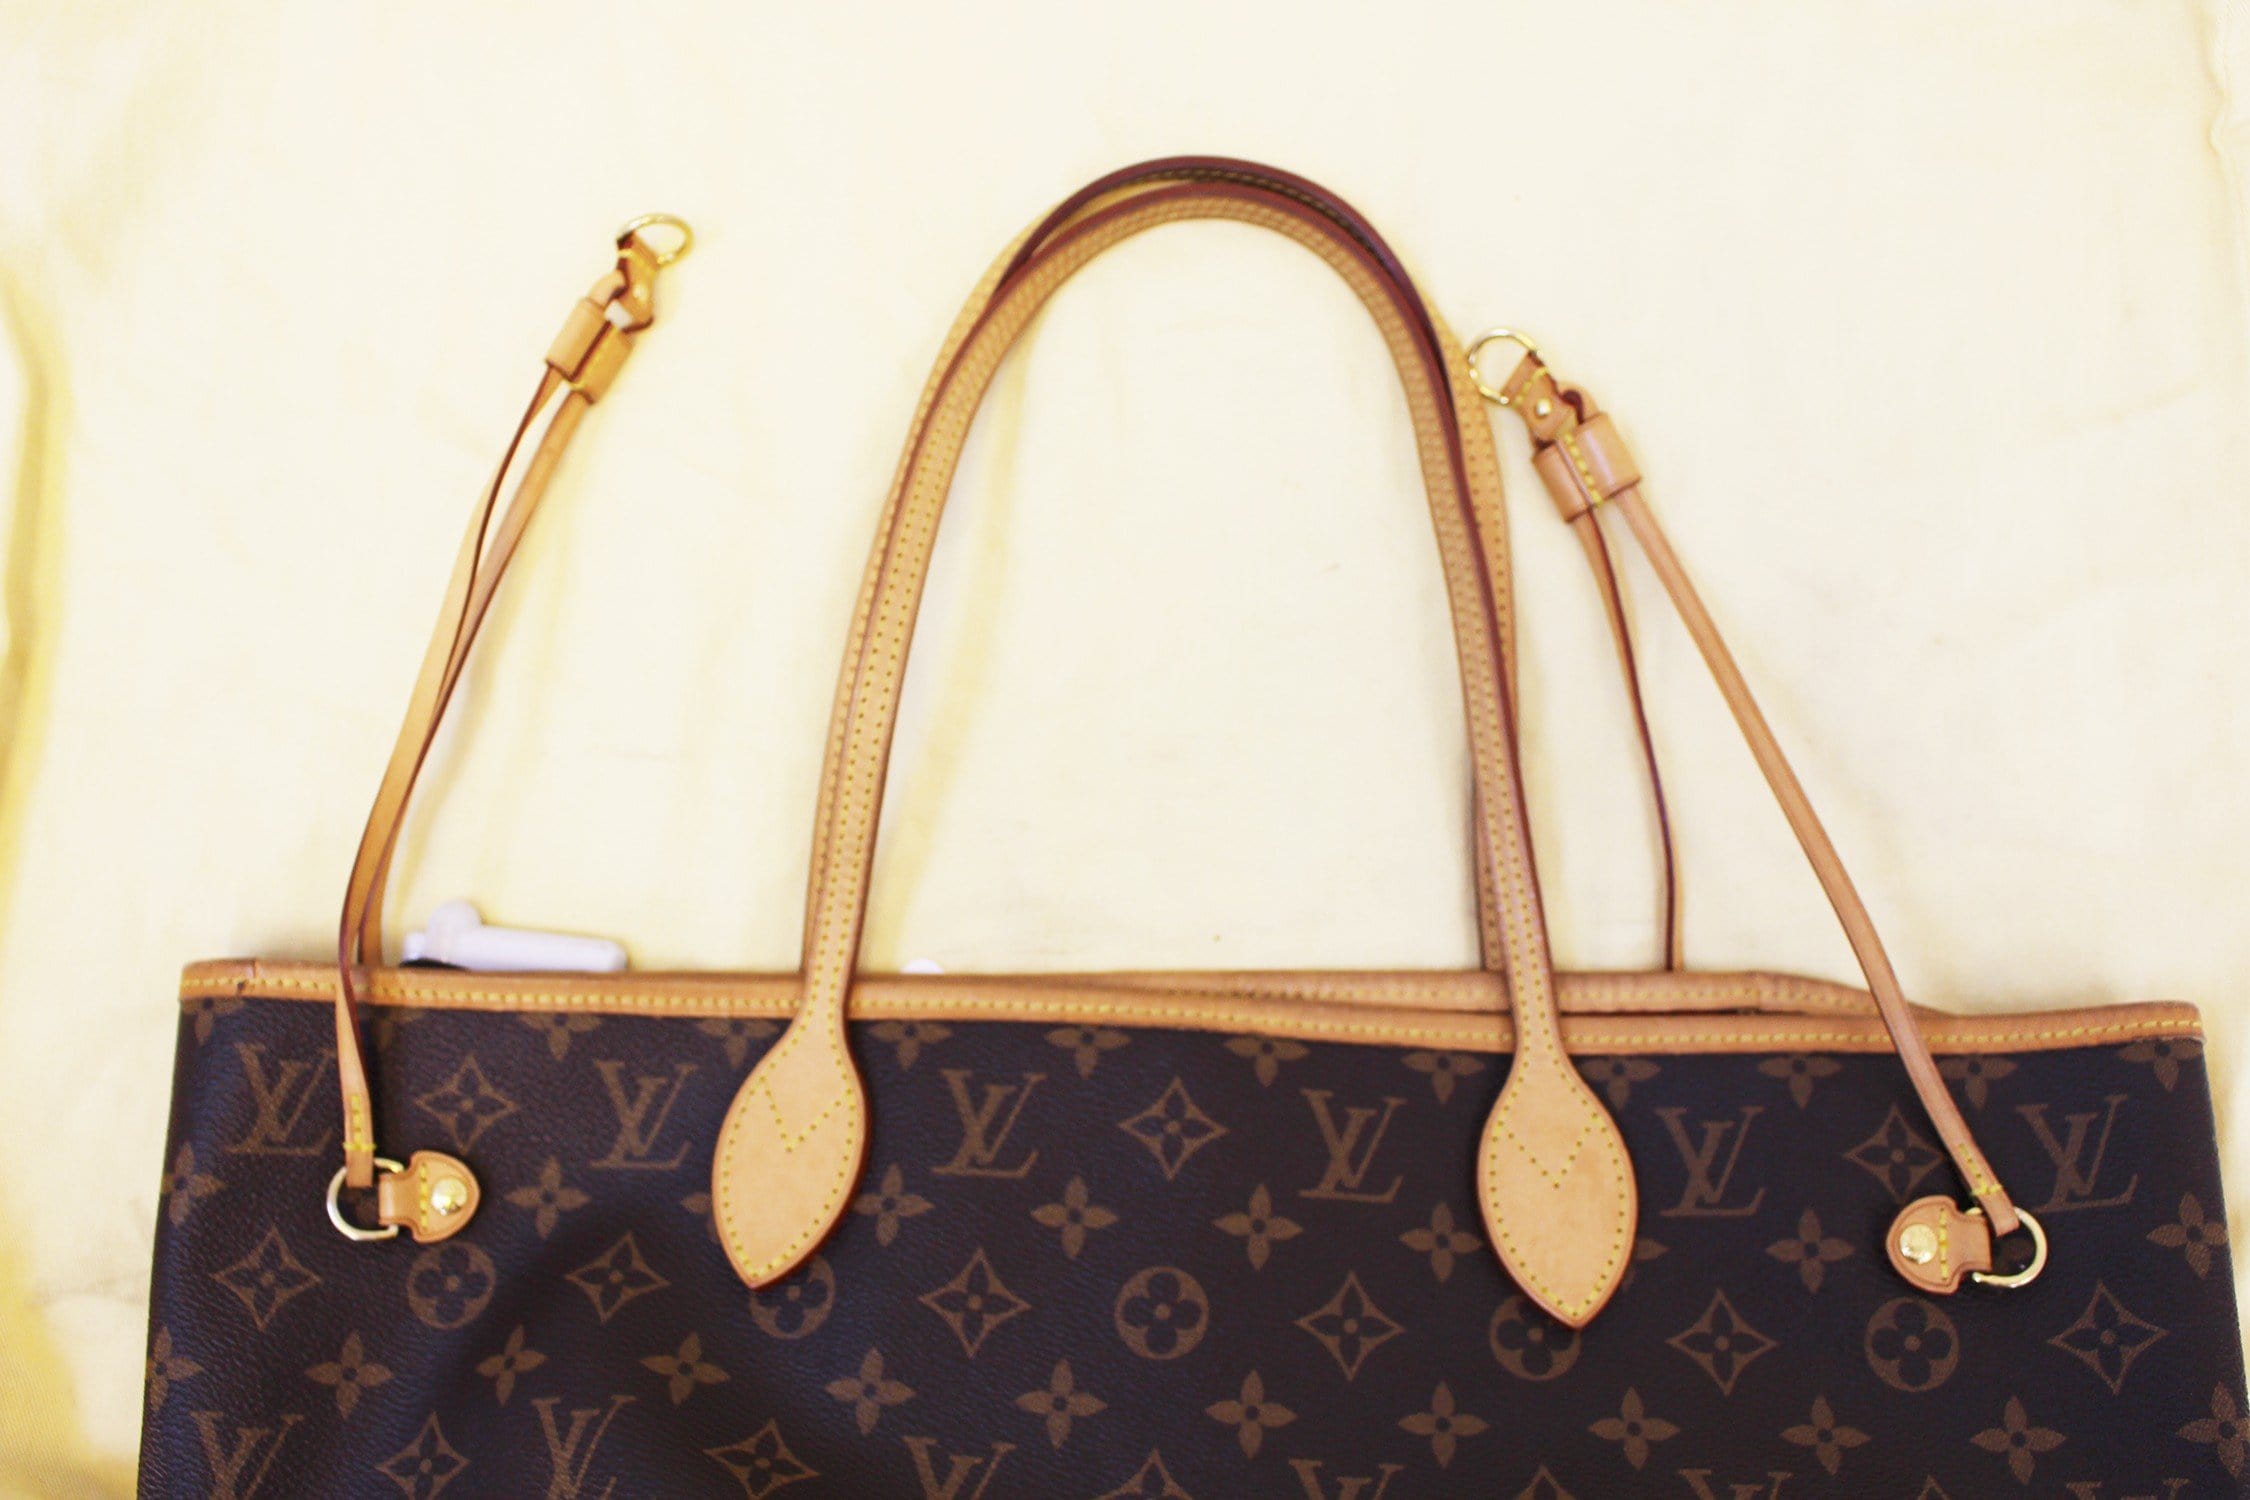 Louis Vuitton Neverfull - Red